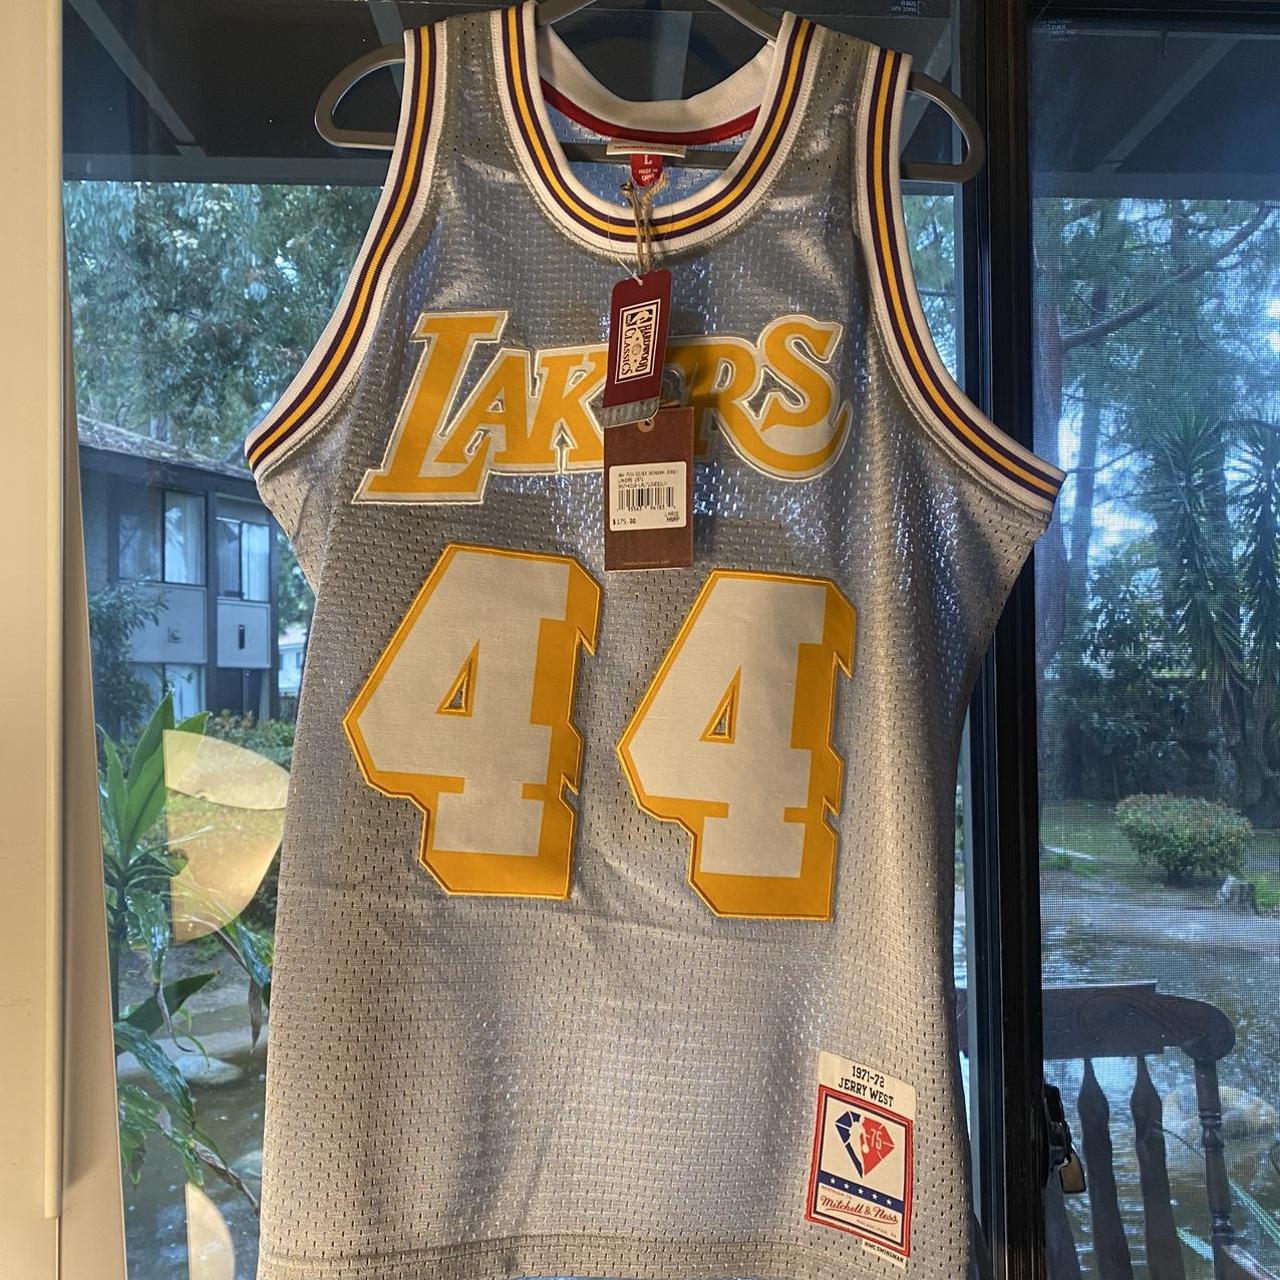 Hot Mitchell & Ness Lakers Practice - Depop